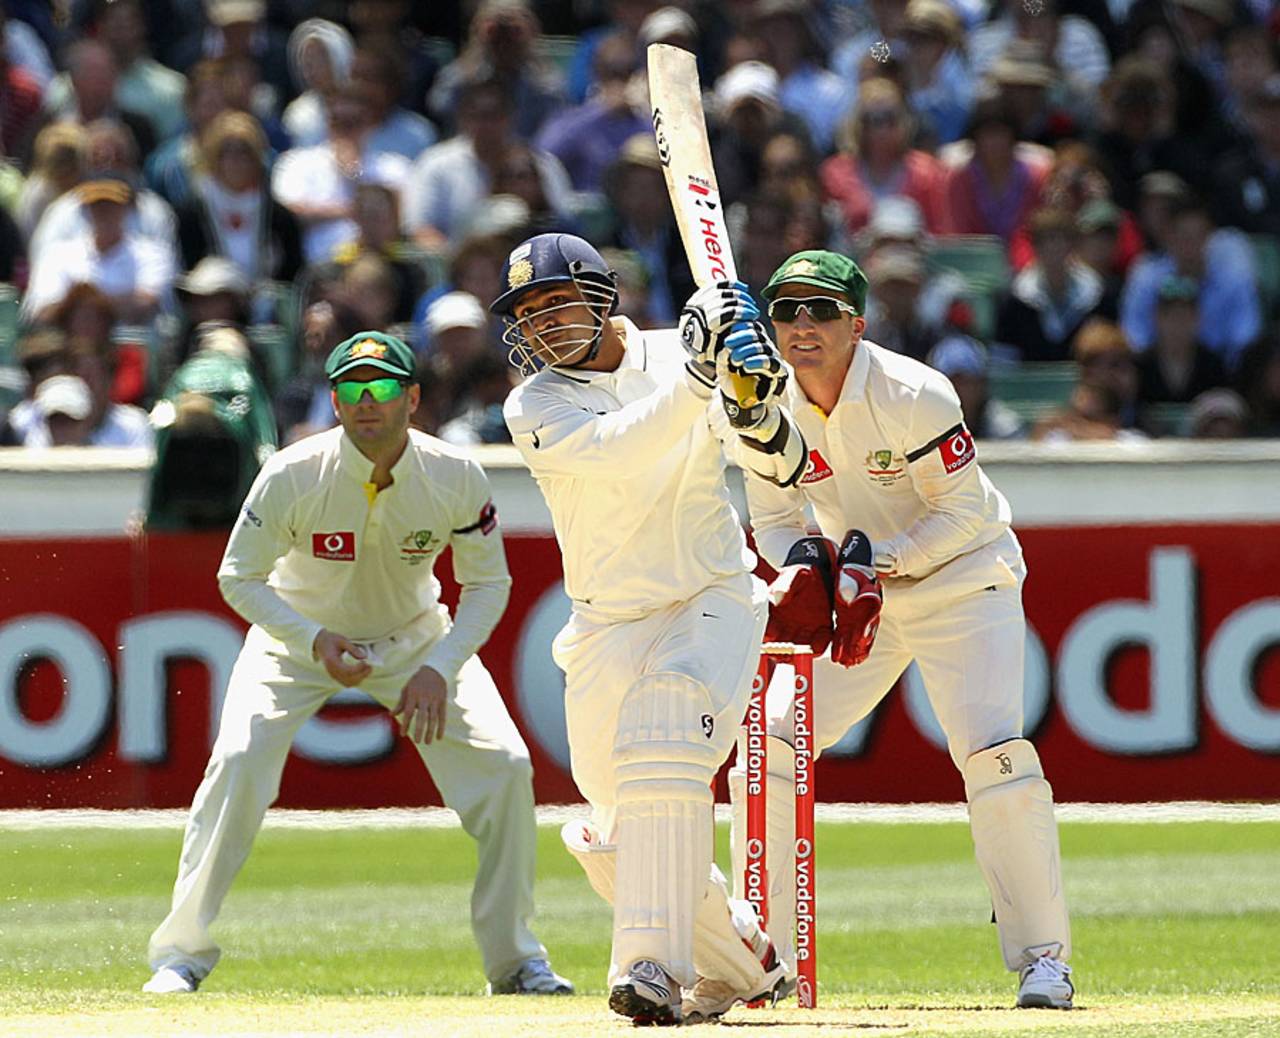 Virender Sehwag lofts one down the ground, Australia v India, 1st Test, Melbourne, 2nd day, December 27, 2011